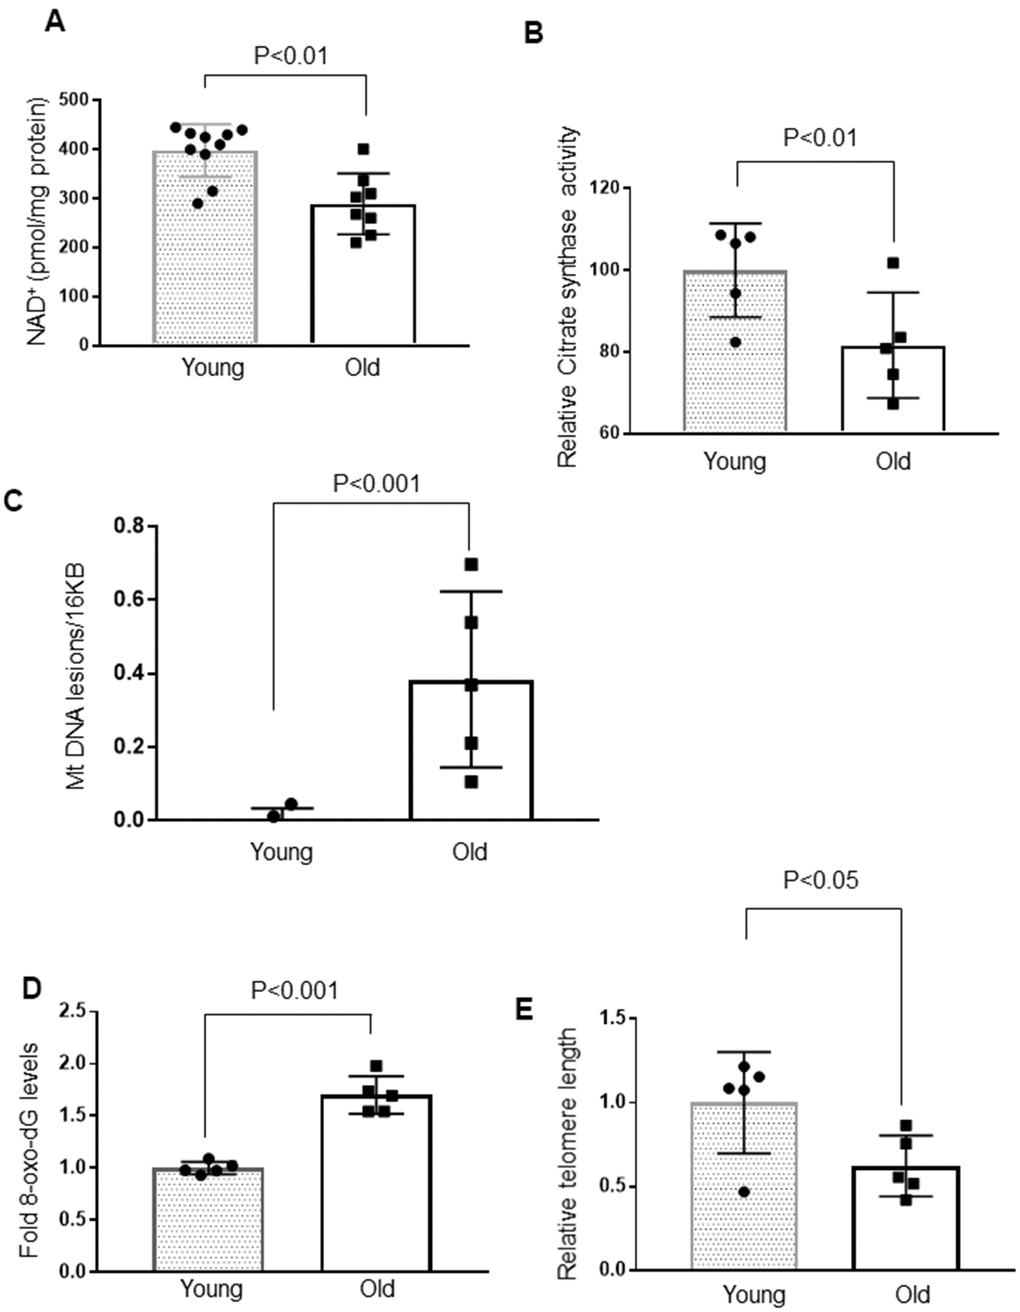 Cardiac aging is associated with decreased mitochondrial function and increased mtDNA and telomere damage. (A) Quantification of NAD+ in the heart lysate of Young and Old mice. Values are mean ± SE, n = 8-10. (B) Relative mitochondrial citrate synthase activity in the heart of Young and Old mice. Values are mean ± SE, n = 5. (C) Relative mitochondrial DNA lesions in the heart of Young and Old mice. (D) 8-Oxo-dG content in the DNA of the whole heart of Young and Old mice. All values are mean ± SE, n = 5. (E) Relative telomere length of Young and Old mice. Values are mean ± SE, n = 5.